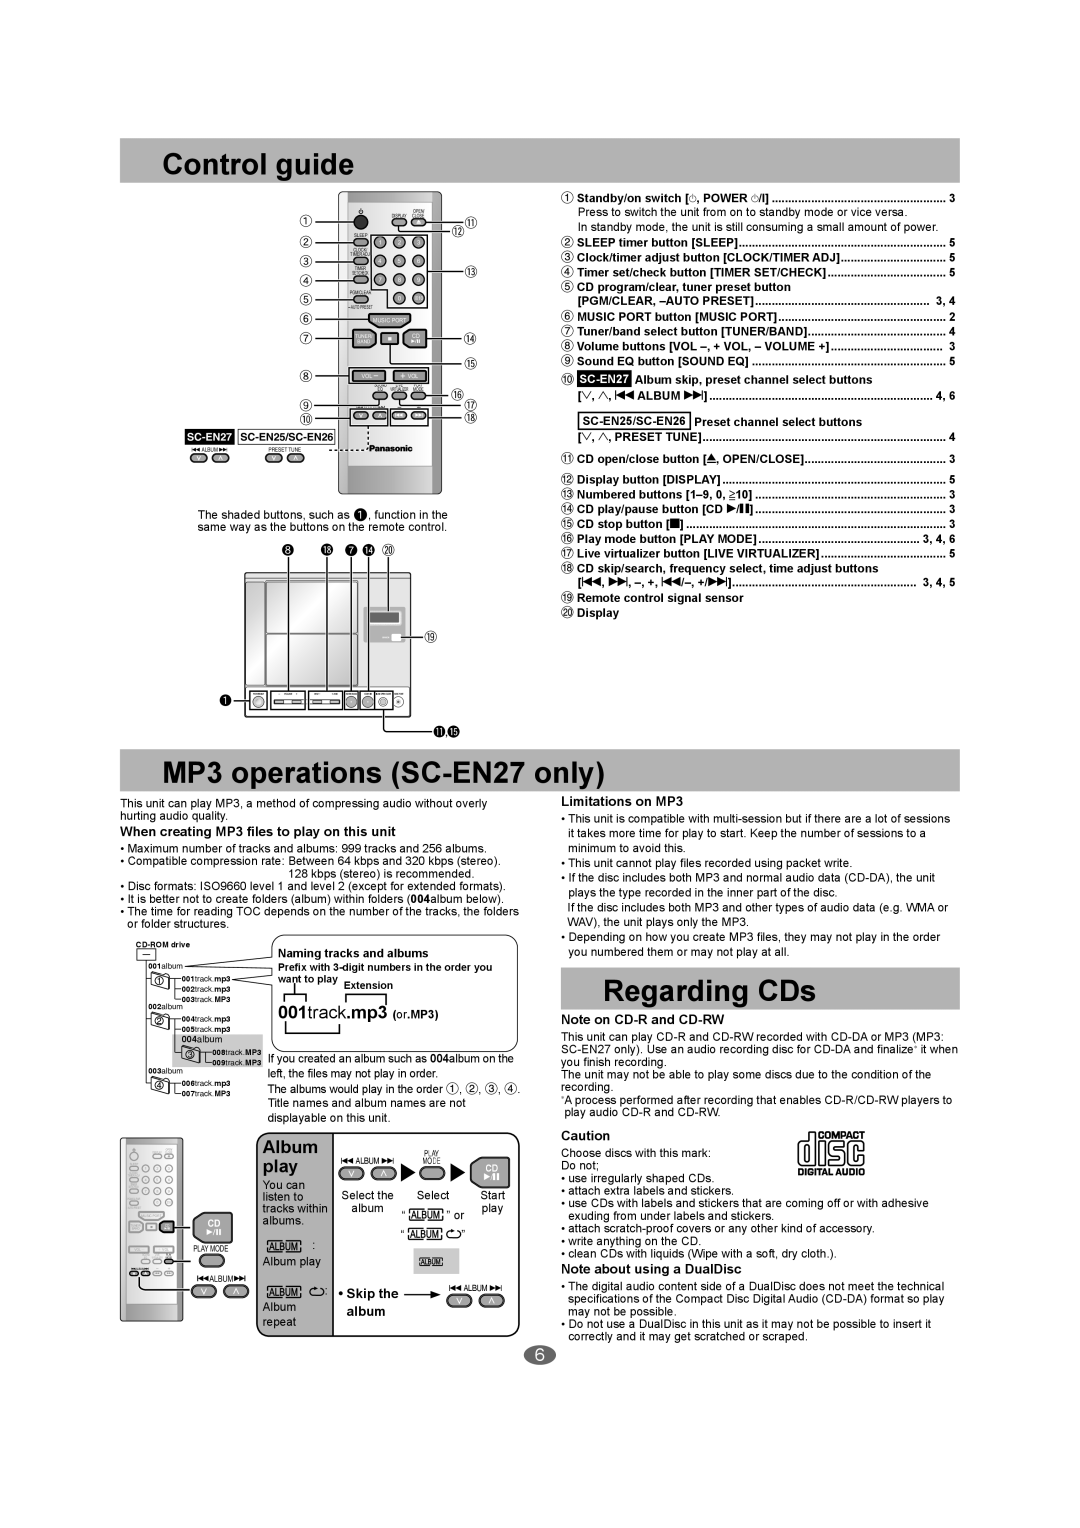 Panasonic Control guide, MP3 operations SC-EN27only, Regarding CDs, 001track.mp3 or.MP3, Album, play, Skip the, album 